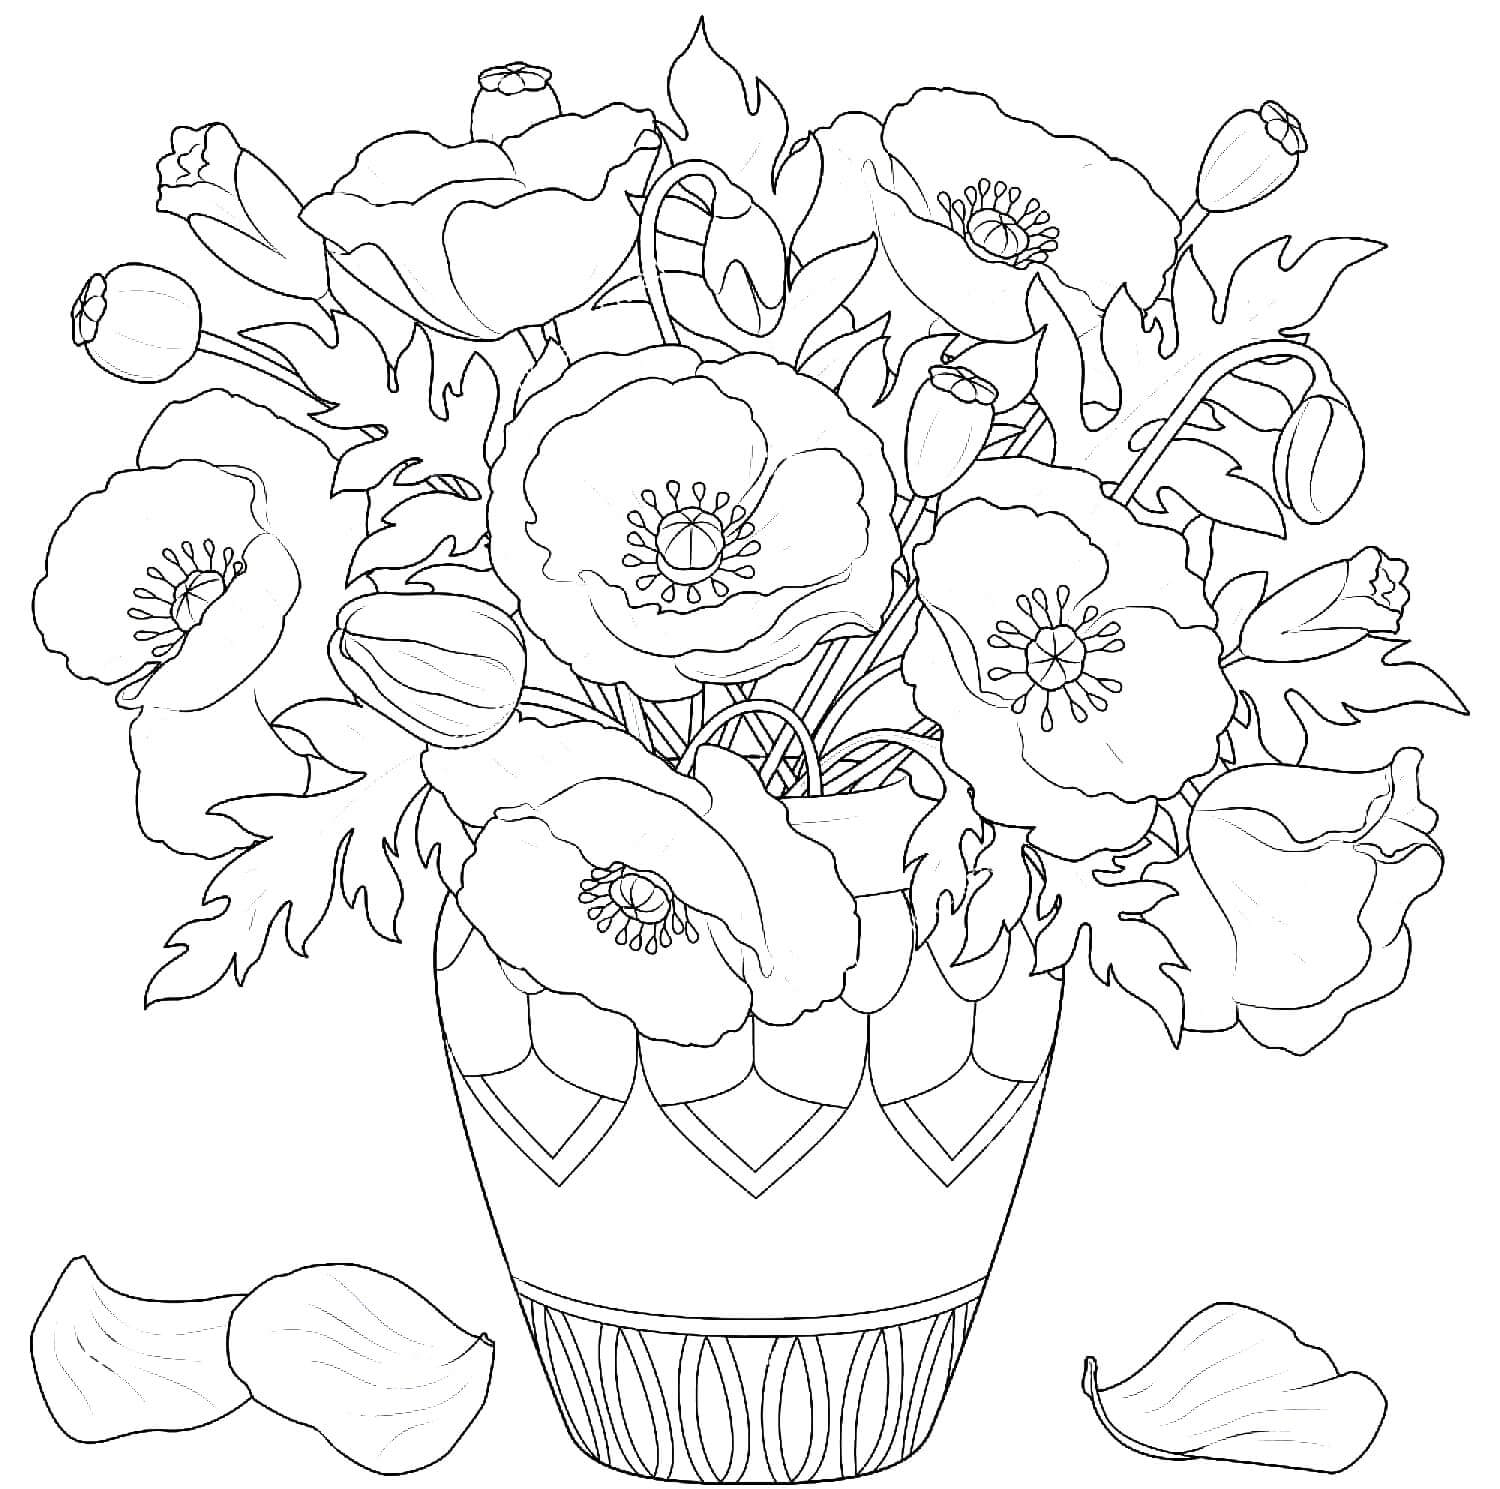 flowers coloring pages for adults pdf | free printable coloring pages for adults only flowers | coloring pages for adults flowers easy